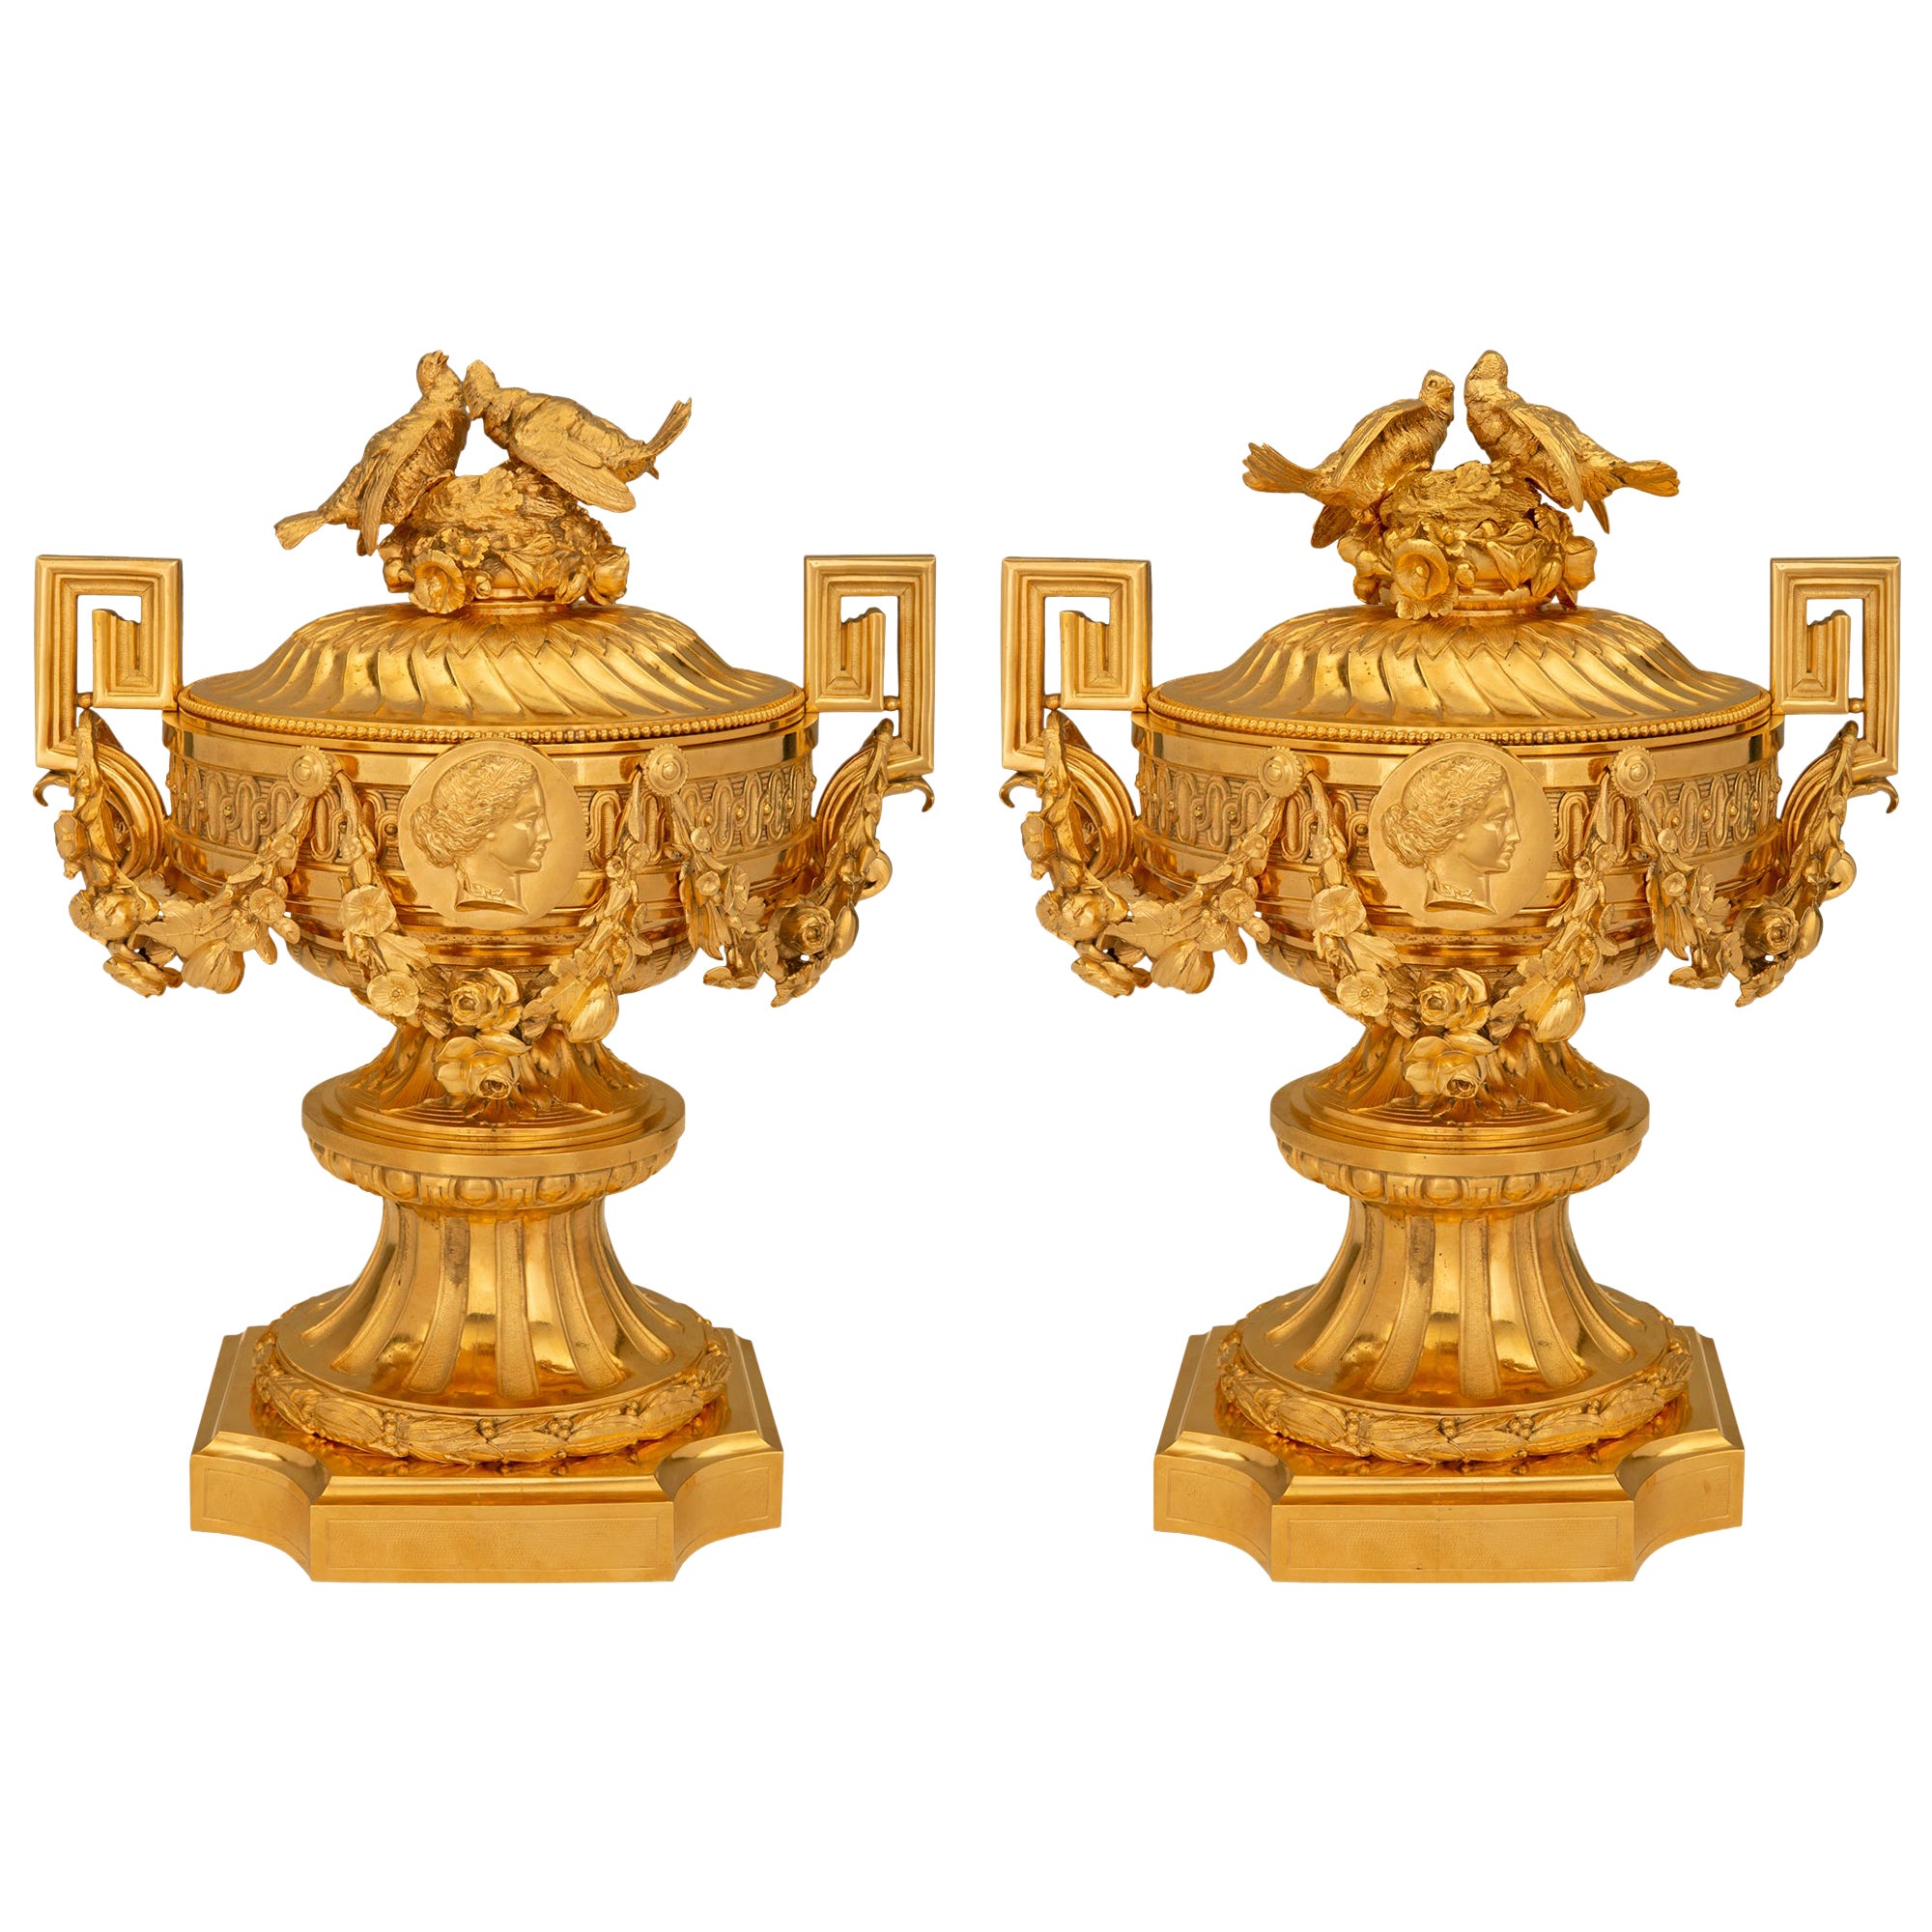 Pair of French 19th Century Napoleon III Period Ormolu Lidded Urns For Sale